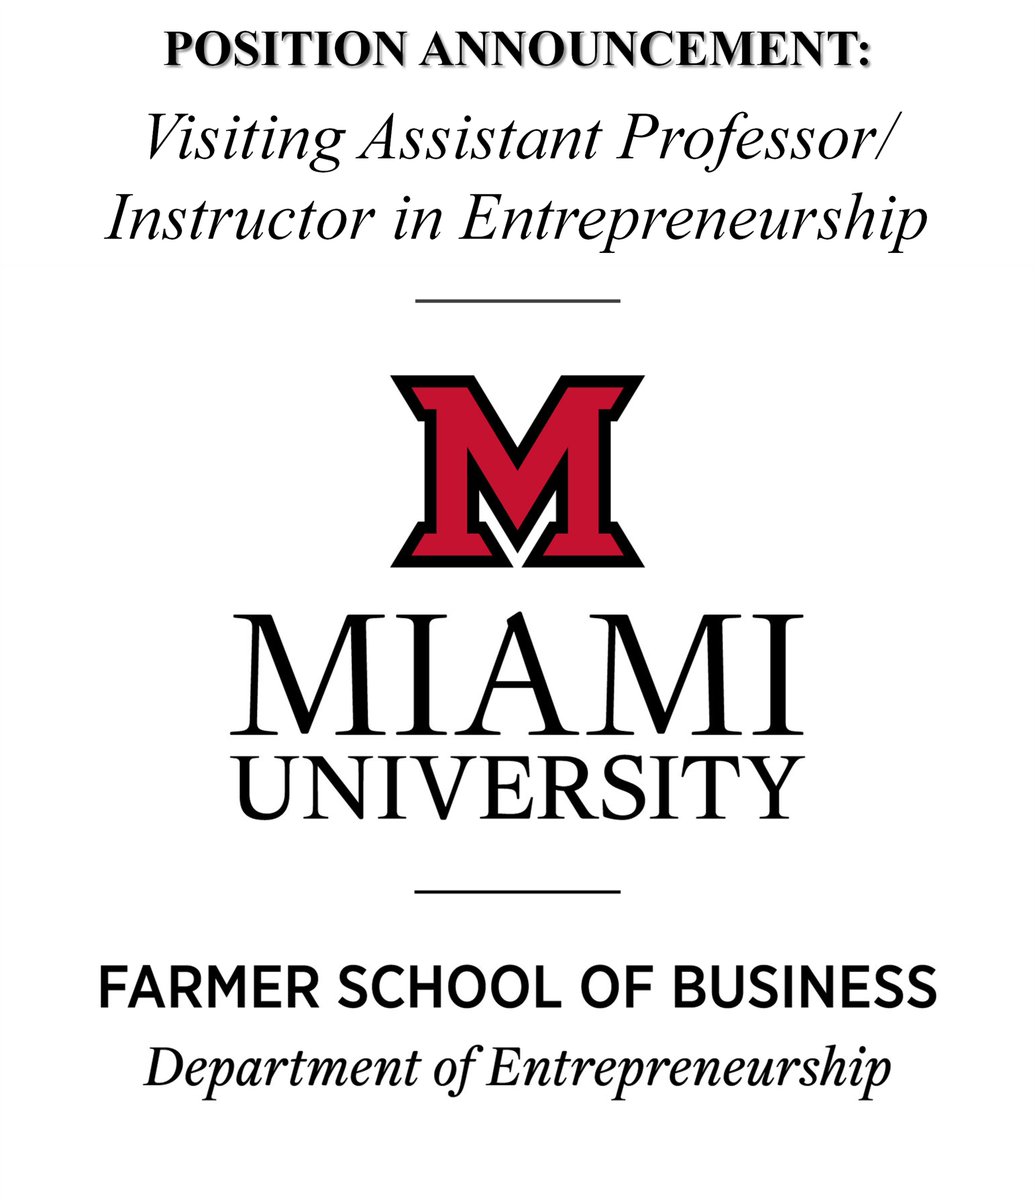 WE'RE HIRING! @MiamiU_ENT in @FarmerSchoolofBusiness at @MiamiUniversity invites applications for a full-time Visiting Assistant Professor/Instructor in Entrepreneurship. Submit application here: jobs.miamioh.edu/cw/en-us/job/5…. #LoveandHonor #BeyondReady @StartupCincy @MiamiAlum